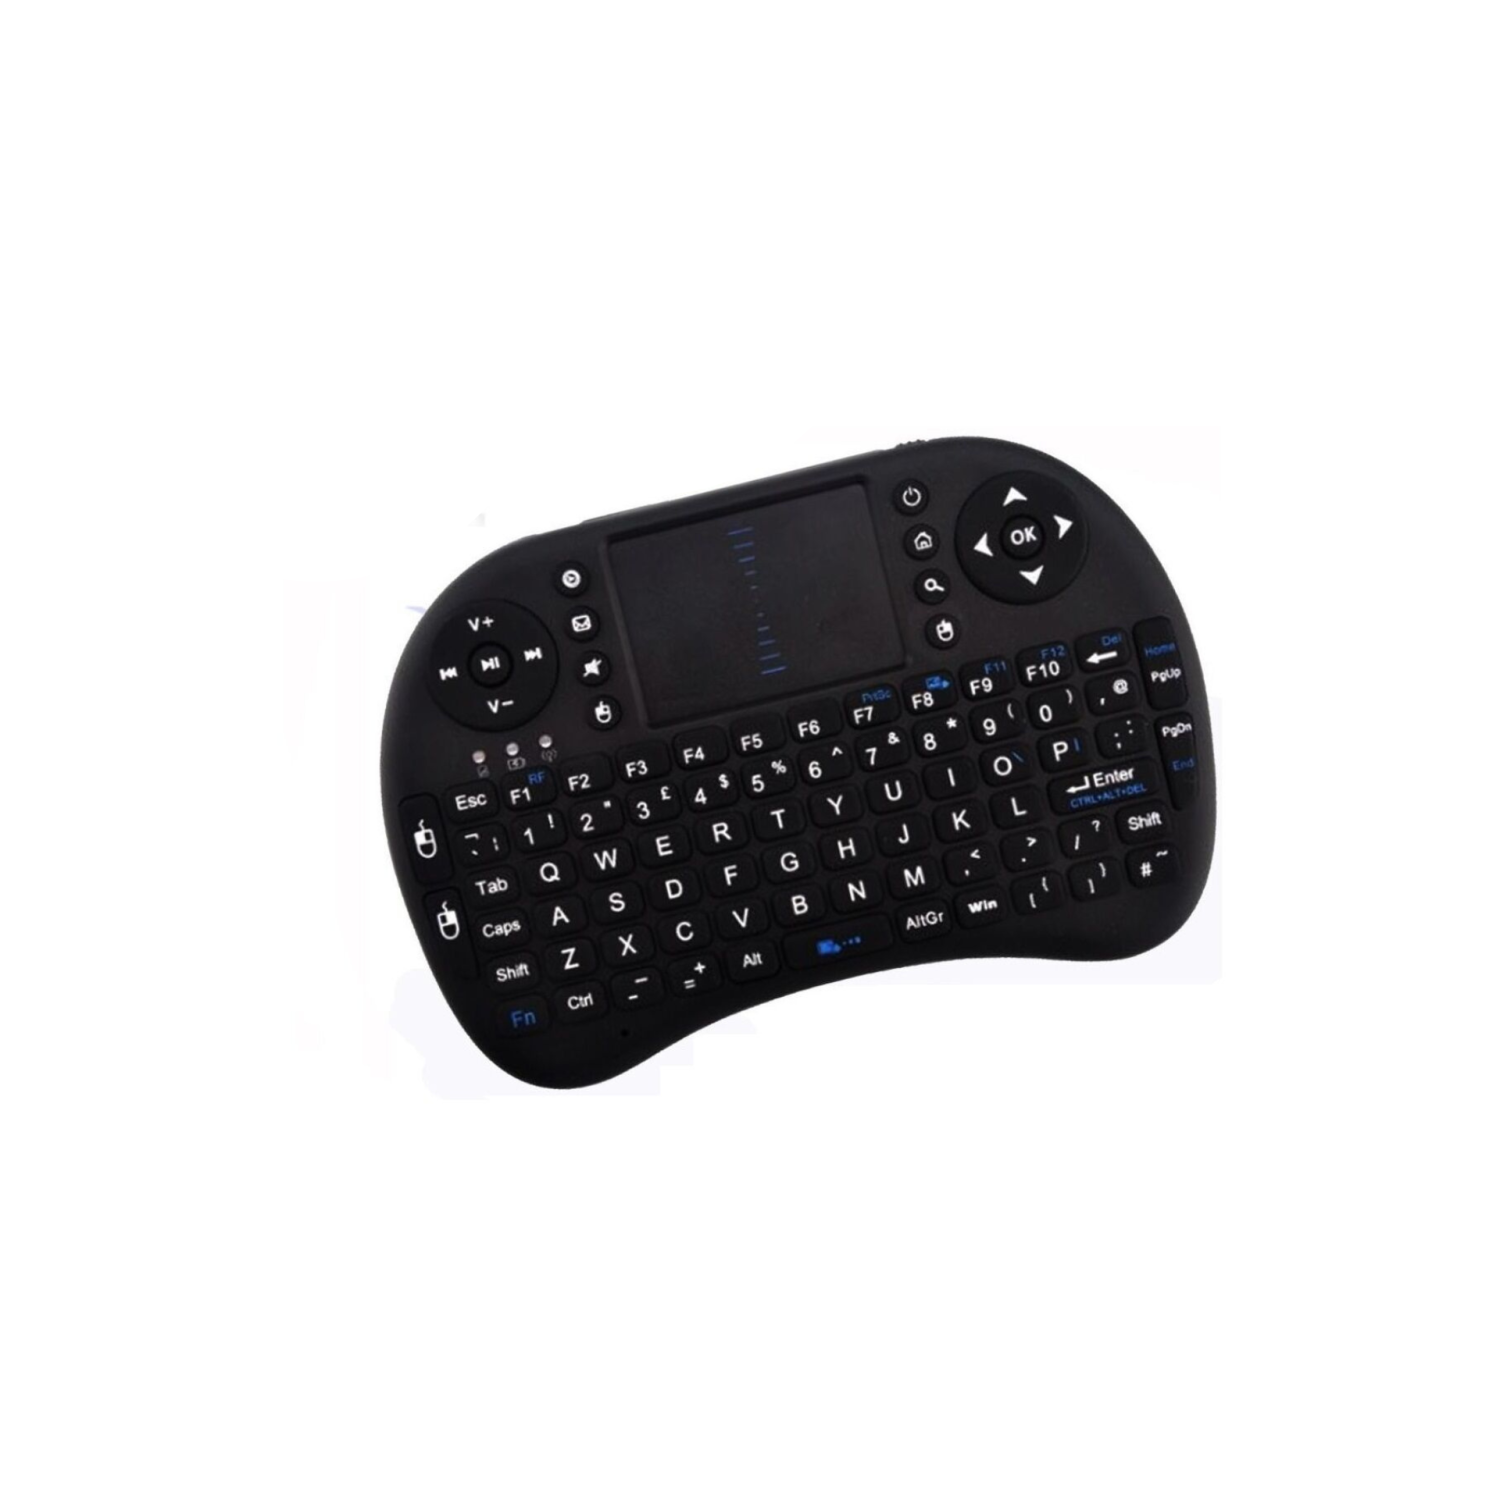 Mini Wireless Remote Keyboard Control for Android Smart TV Box Computer PS4